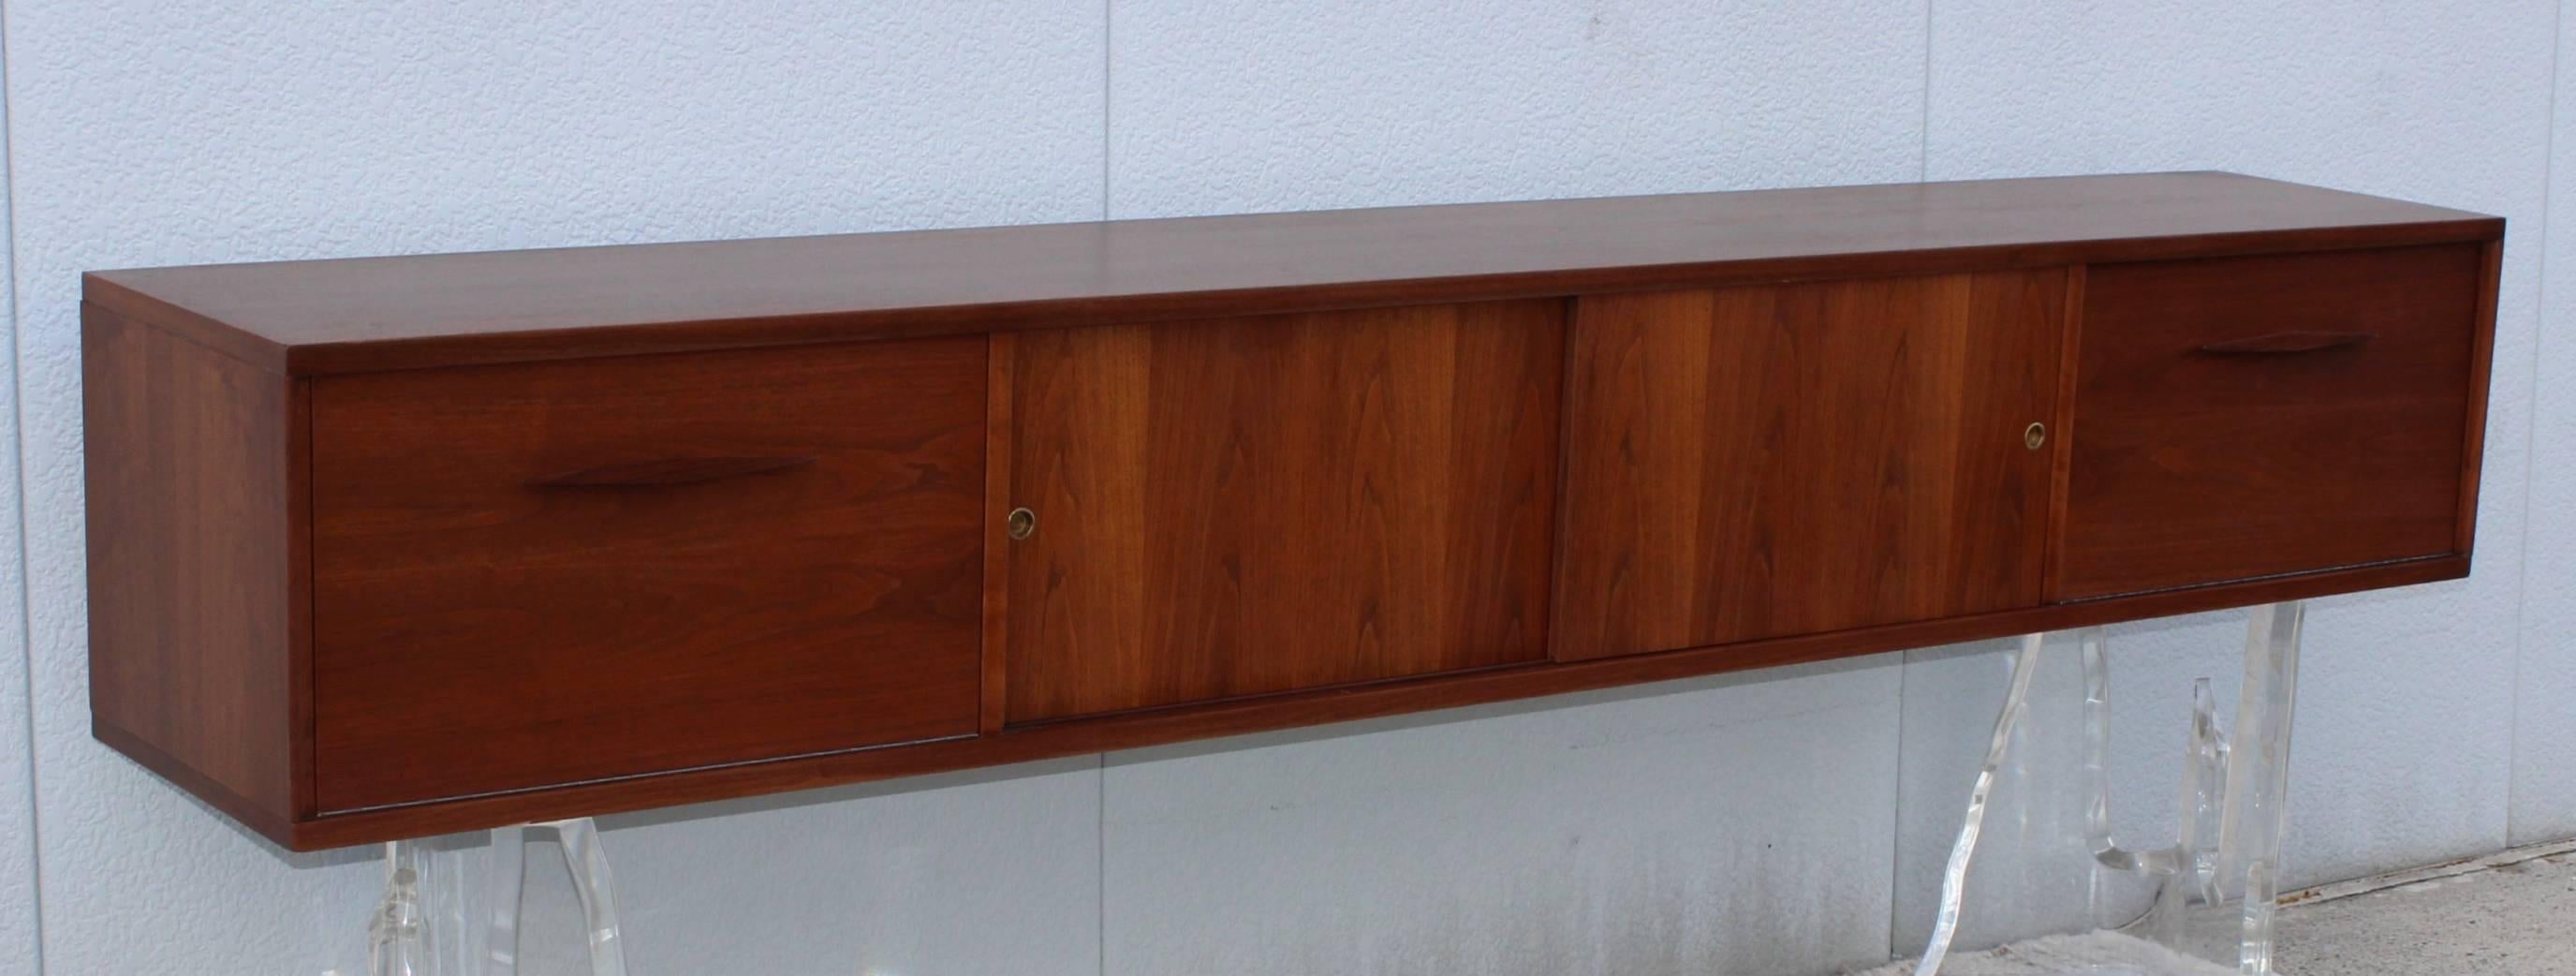 Stunning 1960s modern walnut wall-mounted cabinet or credenza.

Lucite bases are not included, they are for photography only.